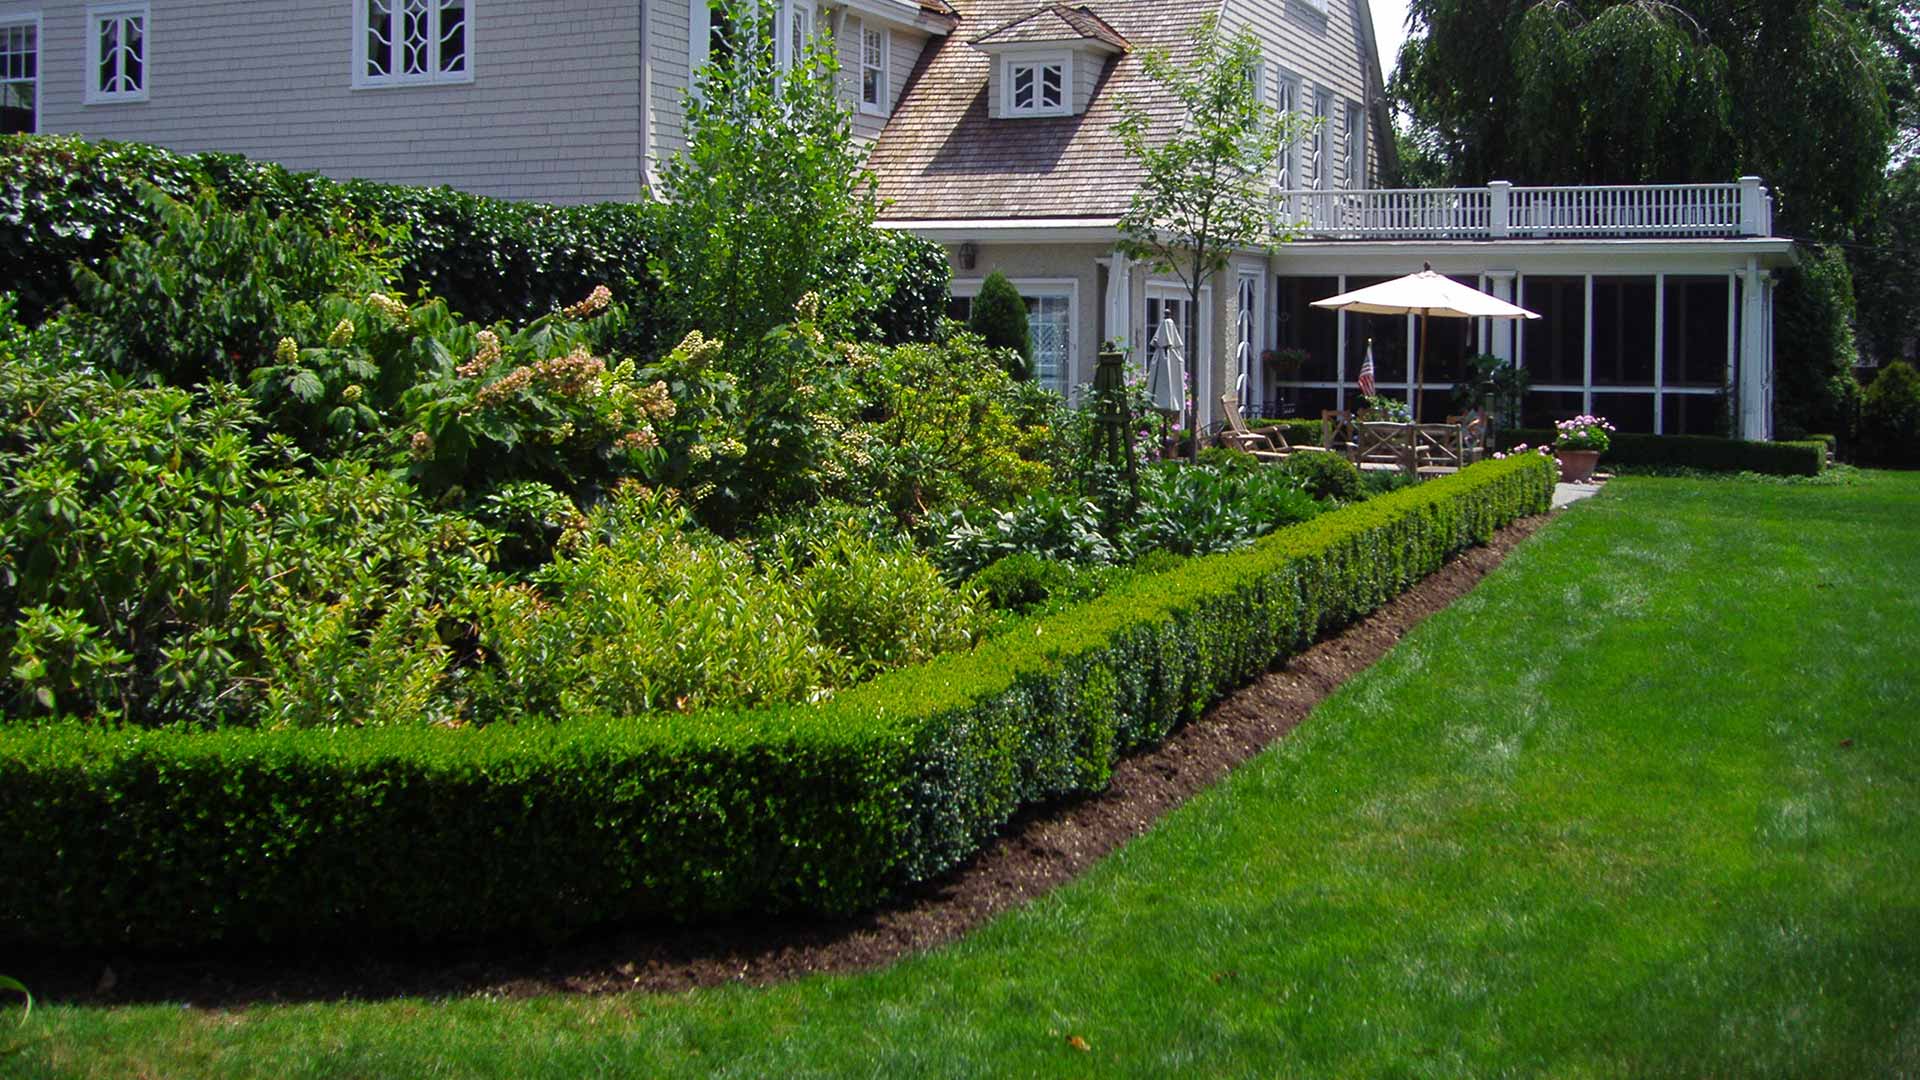 Home landscaping with shrub trimming in Cranford, NJ.